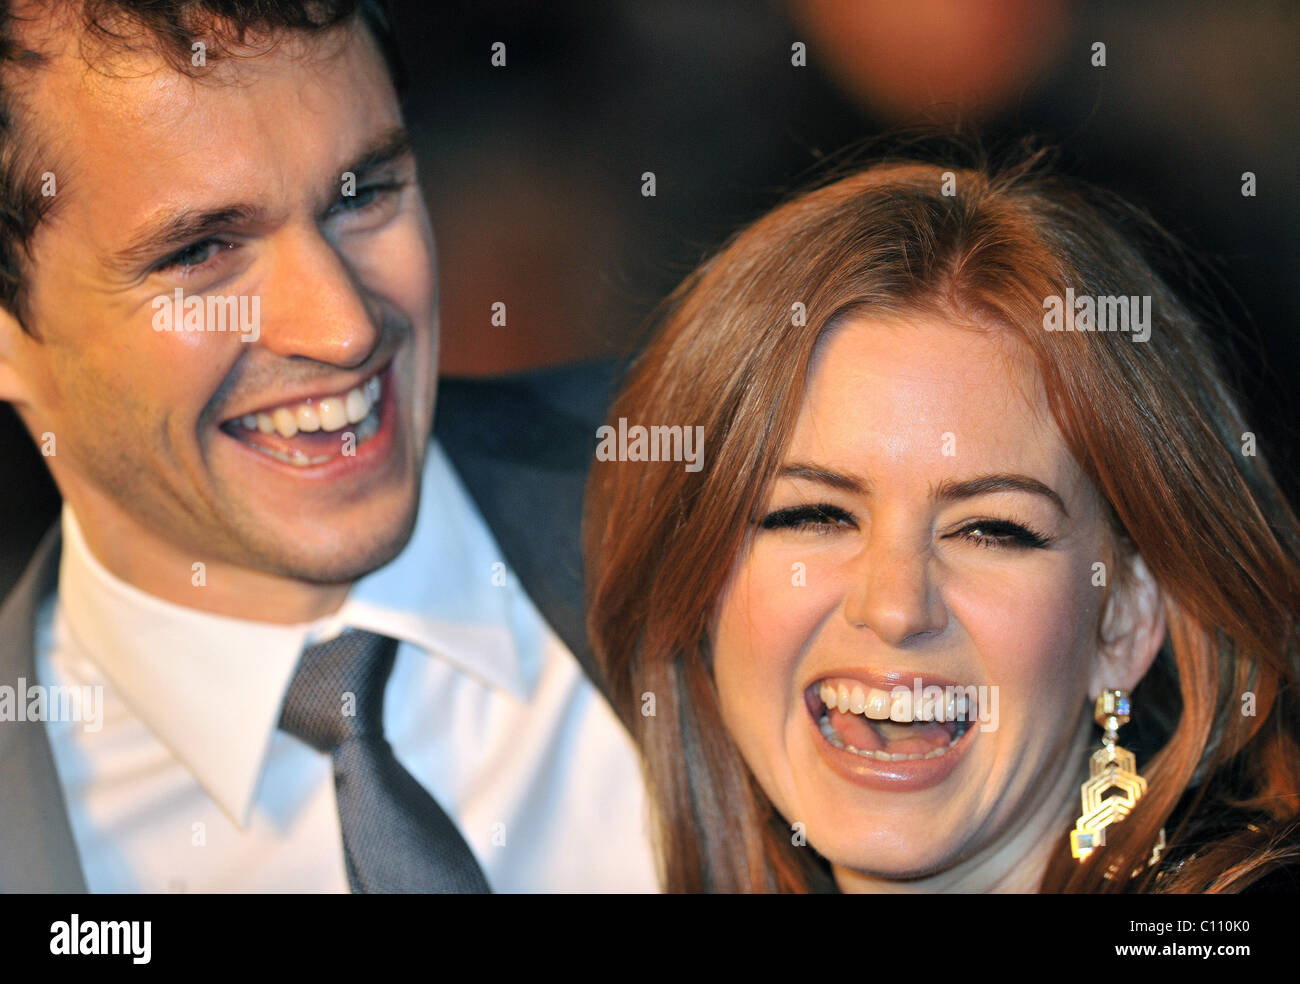 Hugh Dancy and Isla Fisher 'Confessions of a Shopaholic' - UK film premiere held at the Empire Leicester Square London, Stock Photo